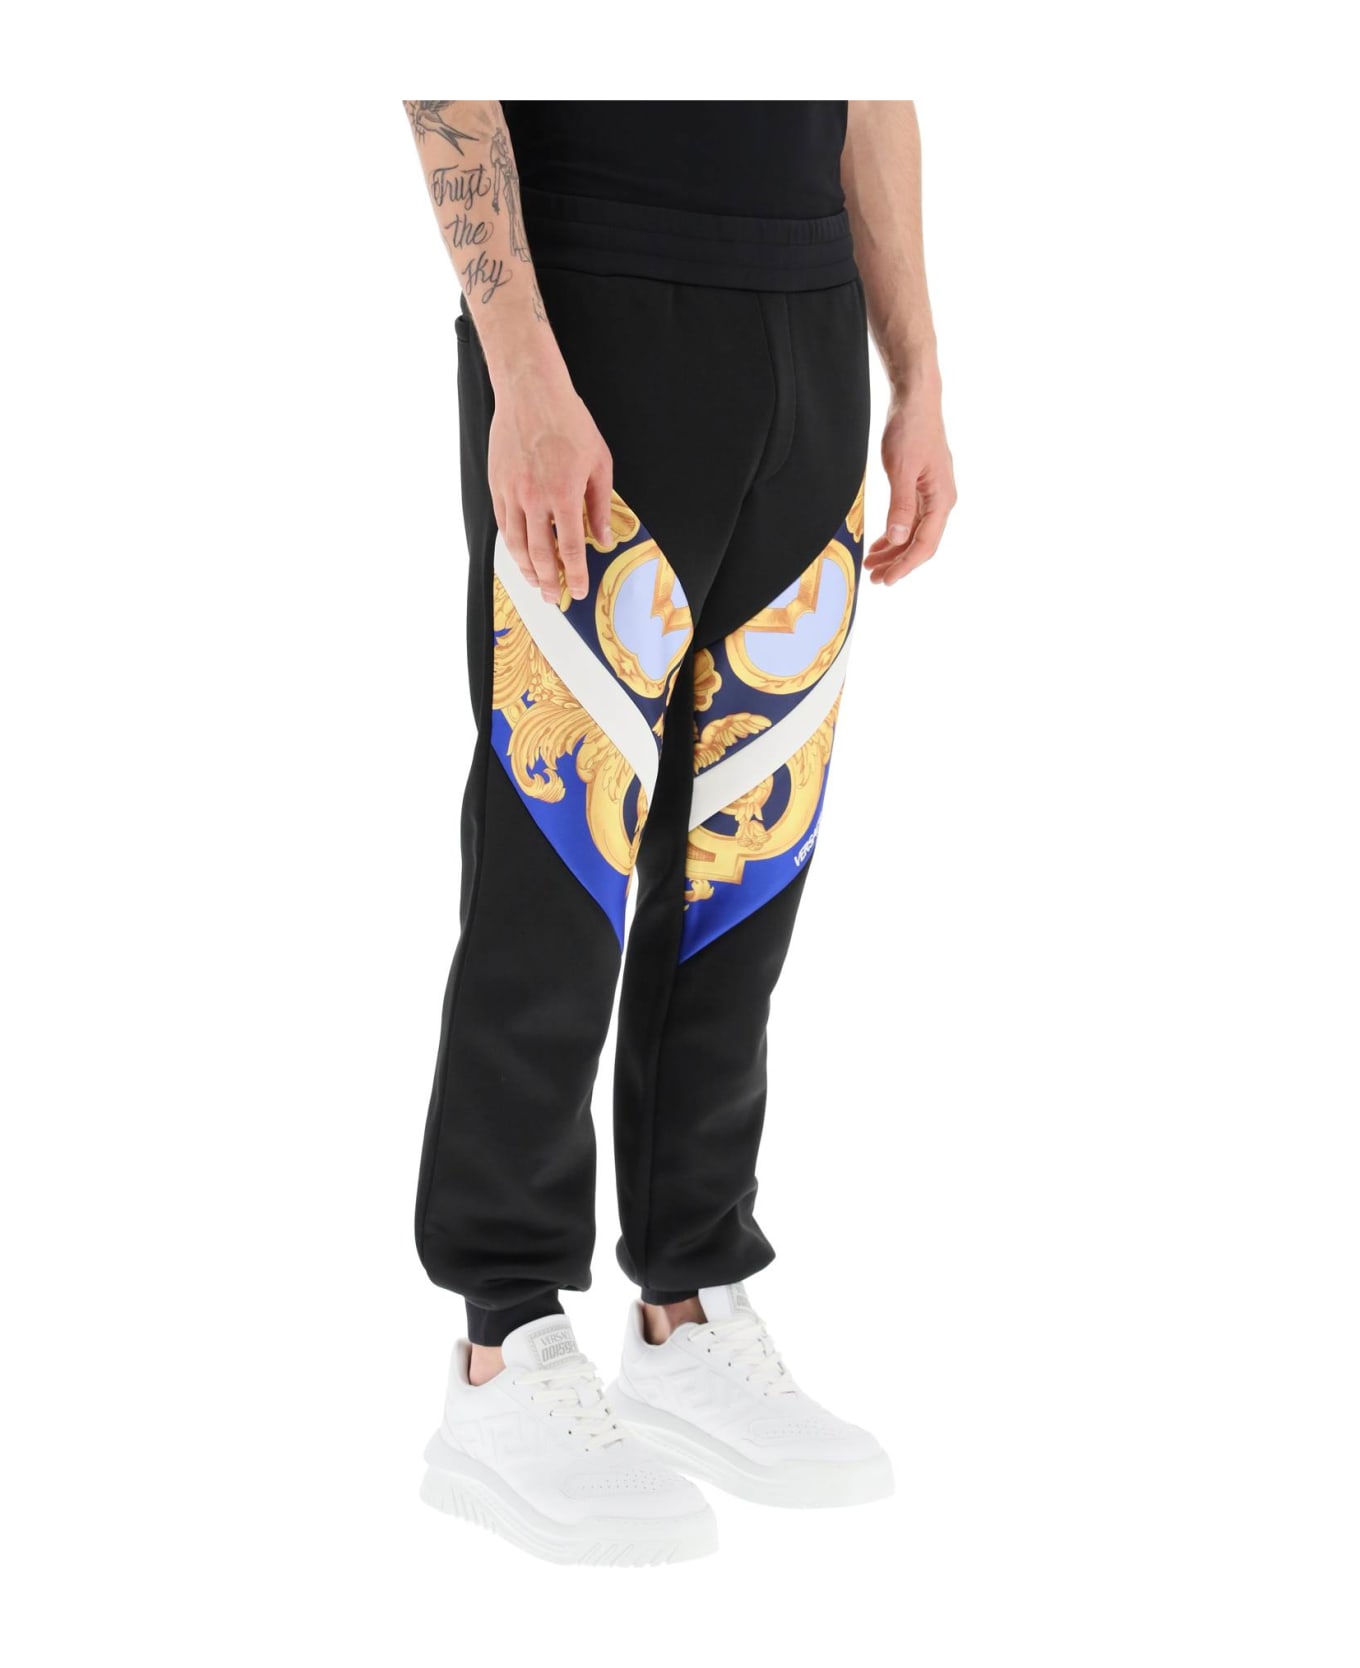 Versace Interlock Track Pants With Barocco 660 Inserts - Blue